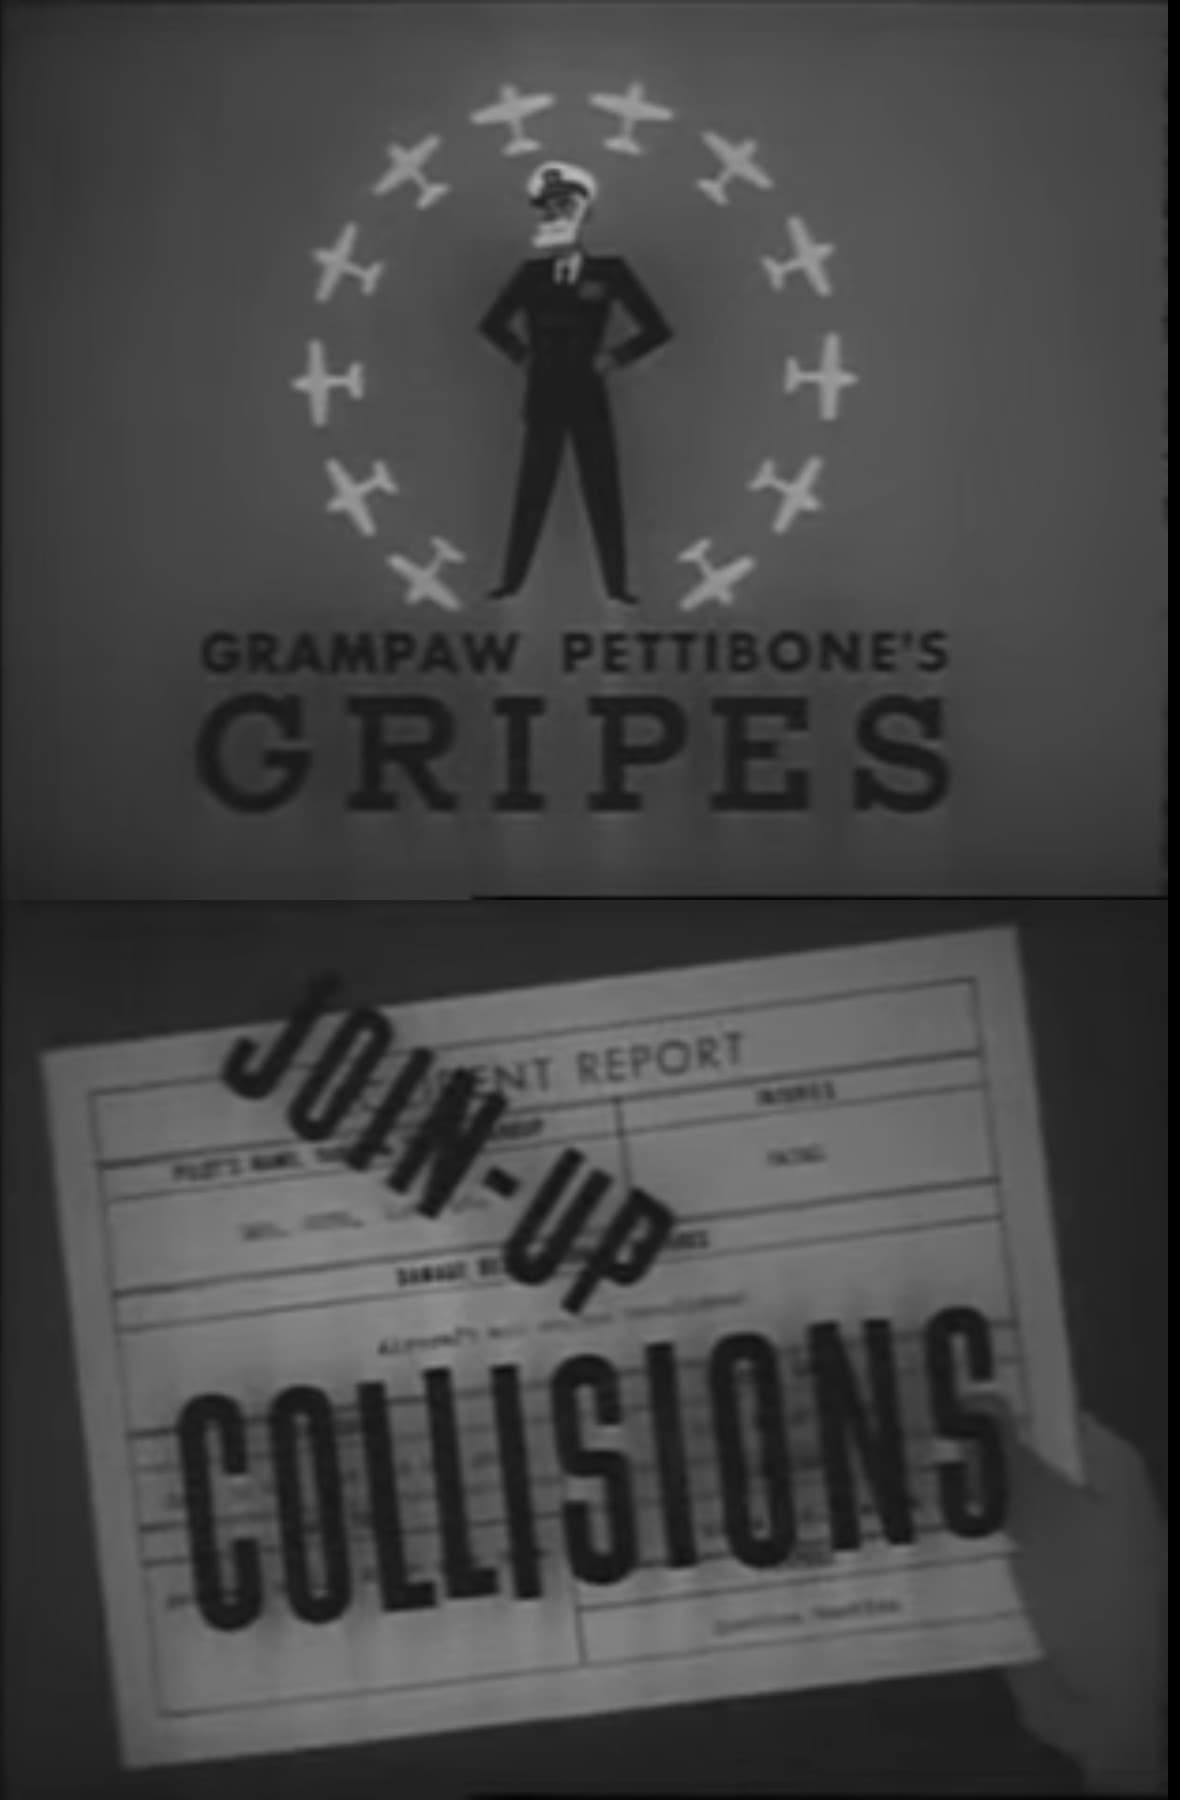 Grampaw Pettibone's Gripes: Join-Up Collisions